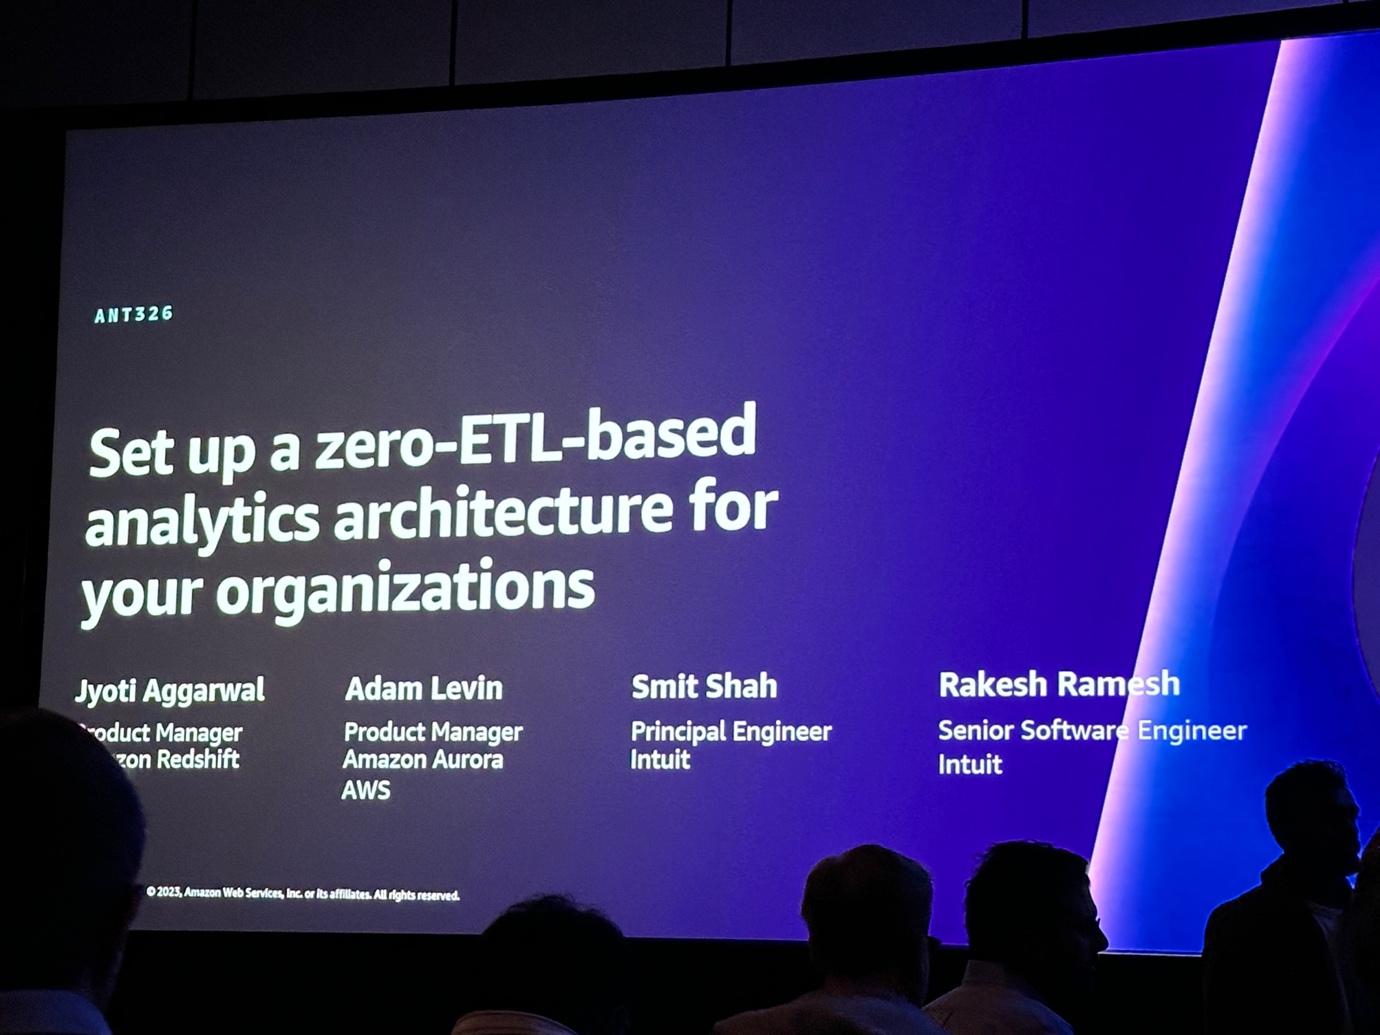 Set up a zero-ETL-based analytics architecture for your organizations